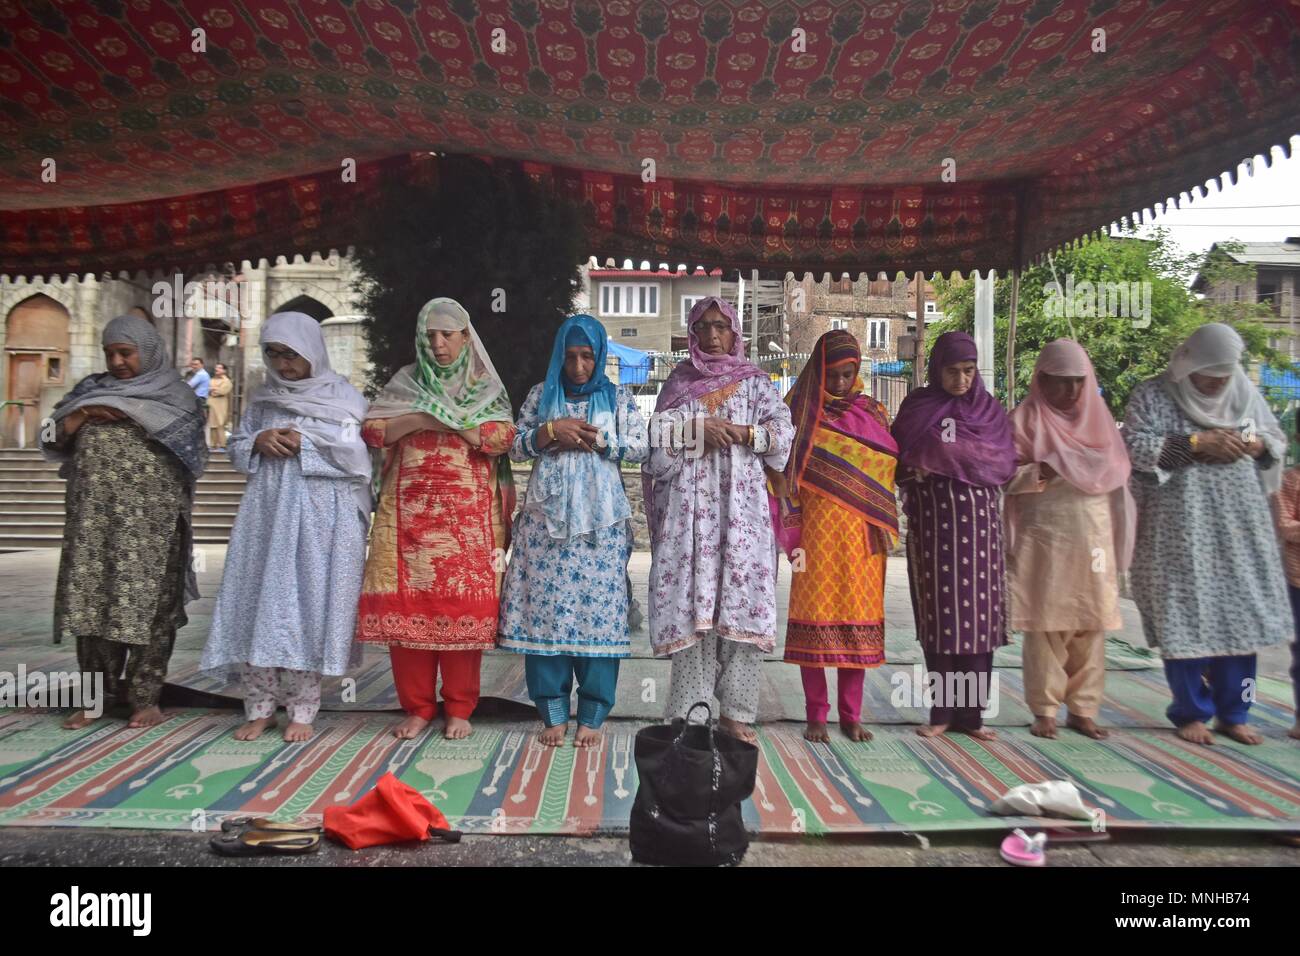 May 17, 2018 - Srinagar, J&K, India - Kashmiri Muslim women offer prayers during the first day of the Muslim holy month of Ramadan in Srinagar, Indian administered Kashmir. Muslims throughout the world are marking the month of Ramadan, the holiest month in the Islamic calendar during which devotees fast from dawn till dusk. Credit: Saqib Majeed/SOPA Images/ZUMA Wire/Alamy Live News Stock Photo